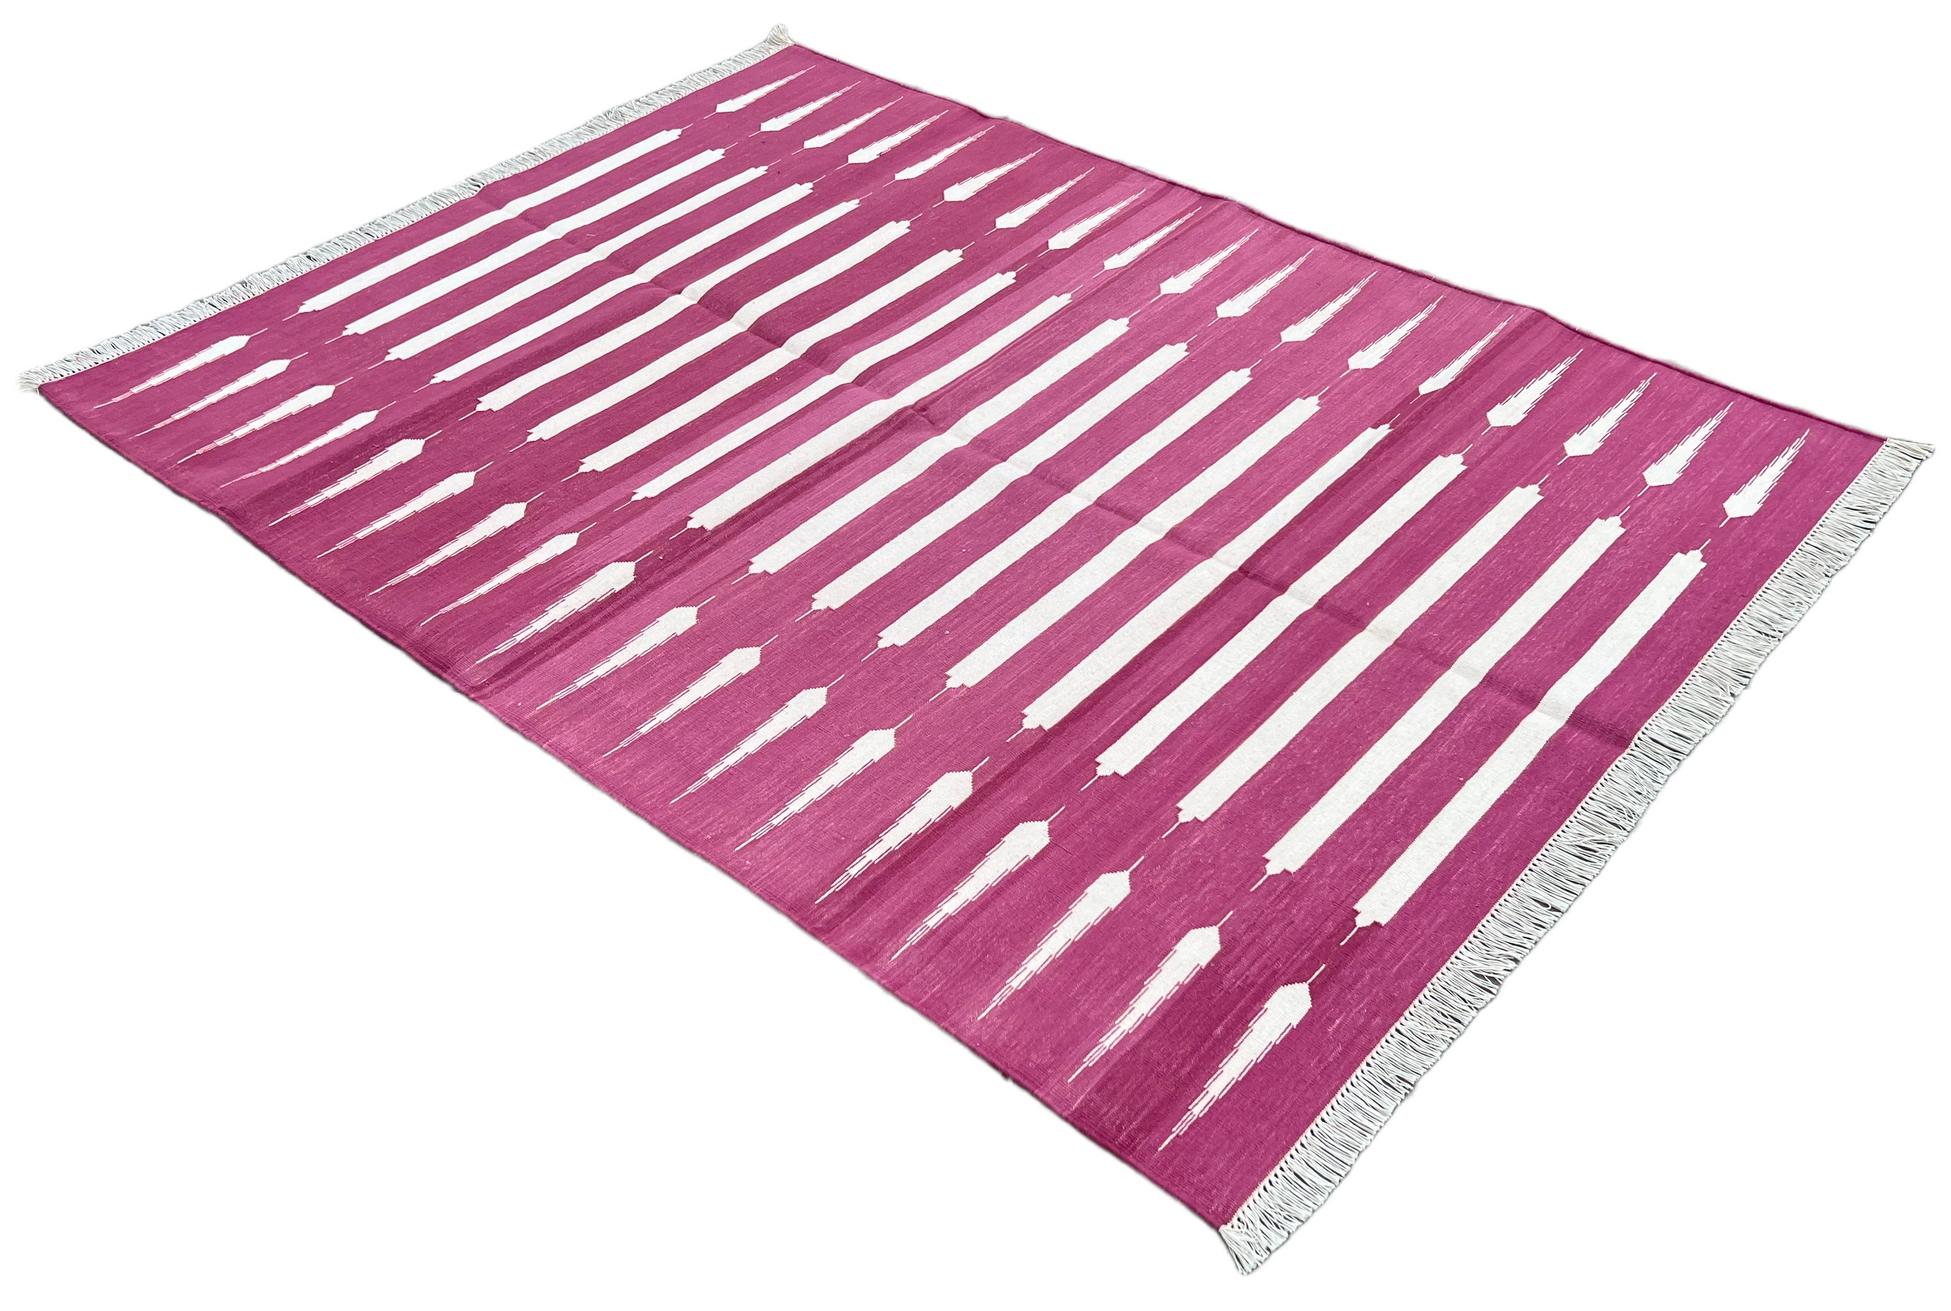 Cotton Vegetable Dyed Pink And White Striped Indian Dhurrie Rug-4'x6' 
These special flat-weave dhurries are hand-woven with 15 ply 100% cotton yarn. Due to the special manufacturing techniques used to create our rugs, the size and color of each